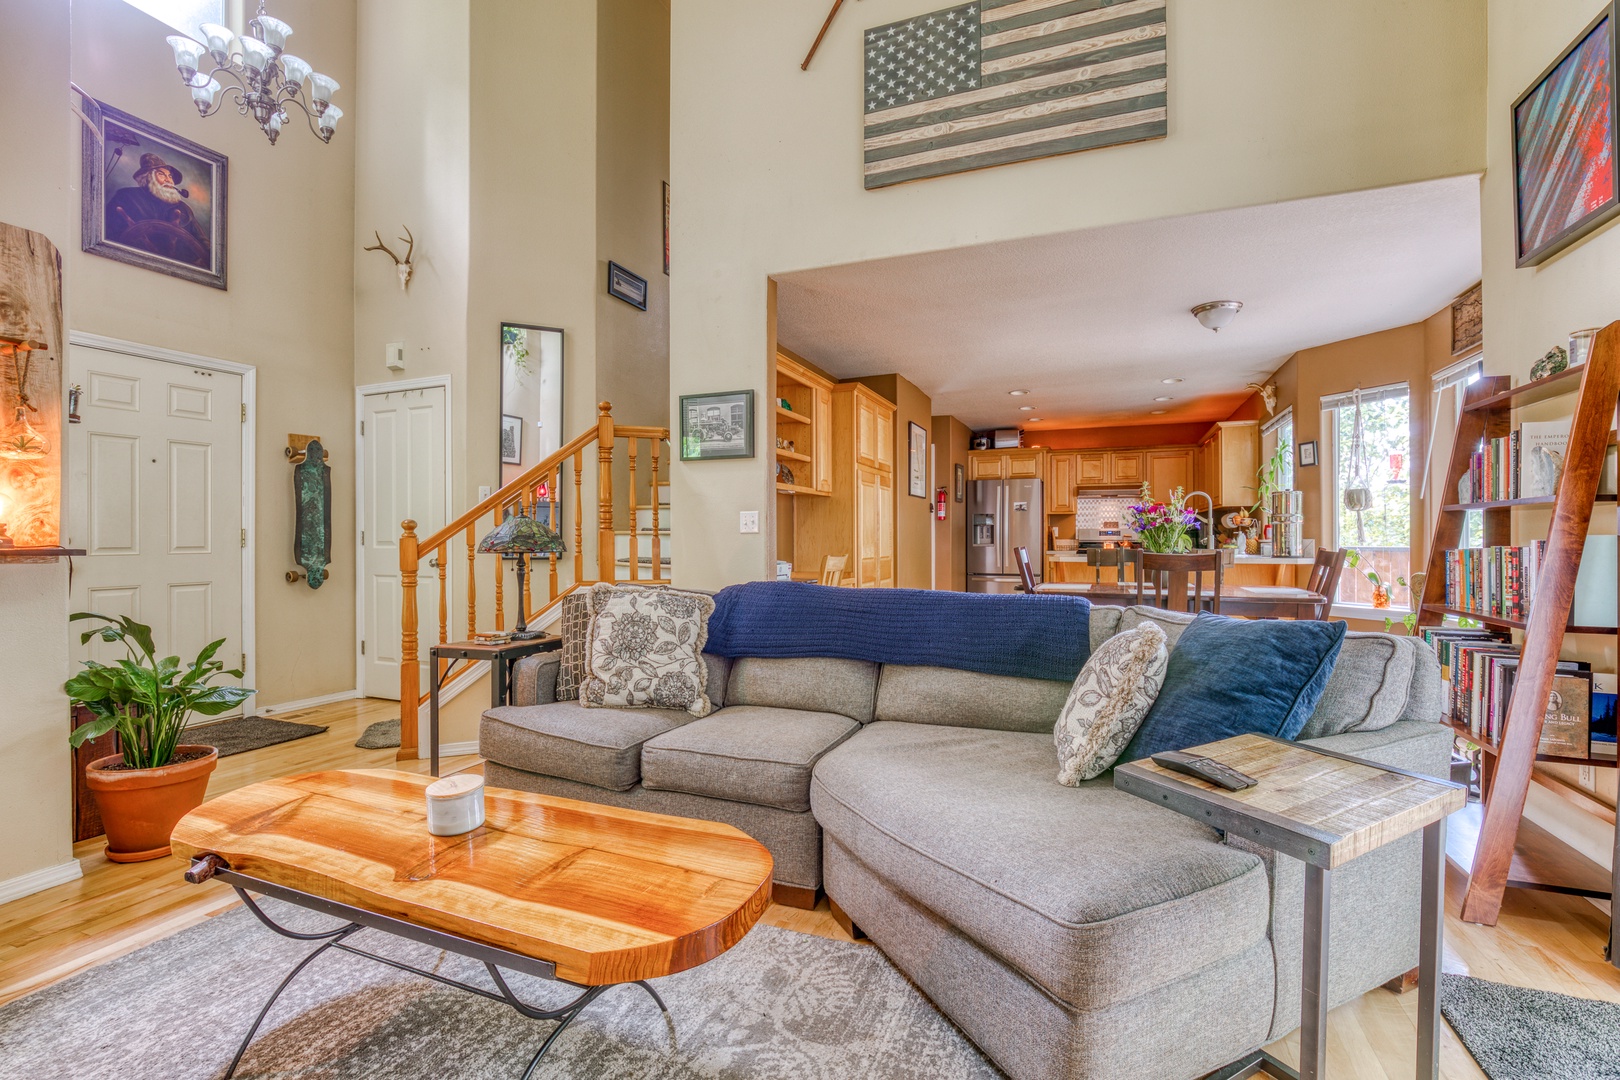 Clackamas Vacation Rentals, Duck Crossing - The living area offers the perfect space to catch up with loved ones